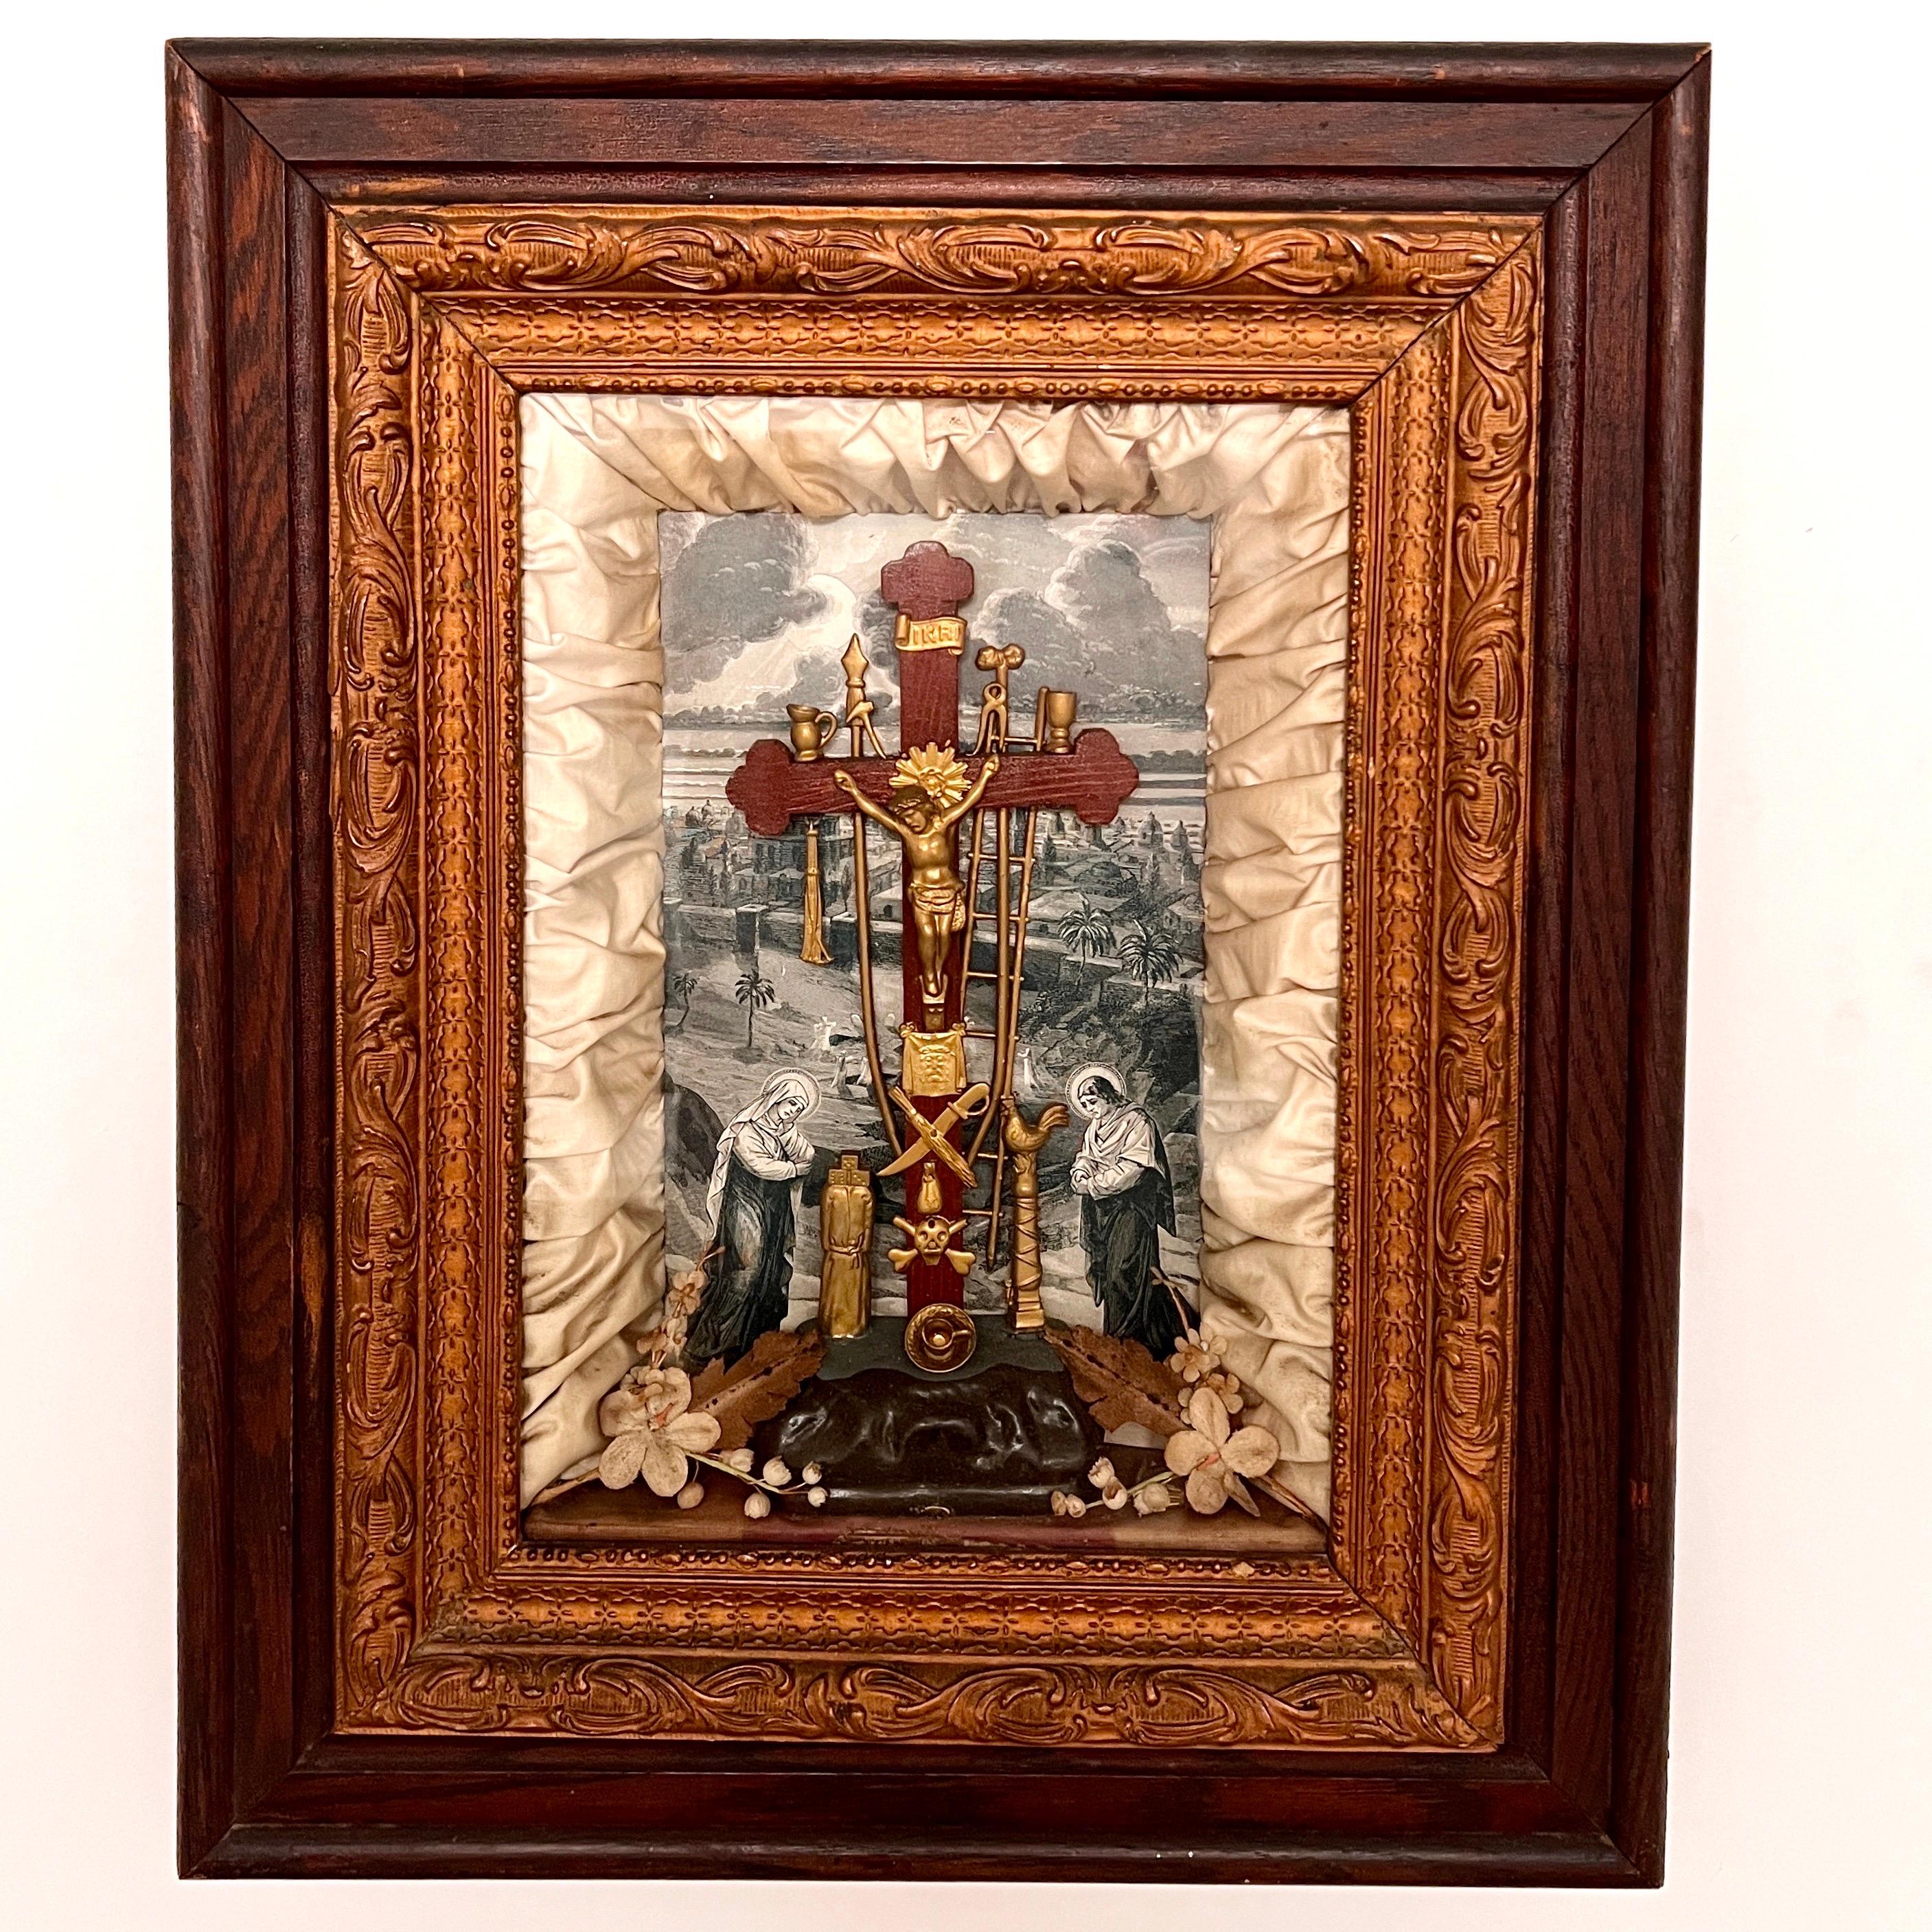 Victorian Era religious shadowbox frame depicting Christ and the instruments of Passion also known as the Arma Christi. Features background print in sepia tones with center wooden cross with a gold Christ as well as various gold metal instruments.